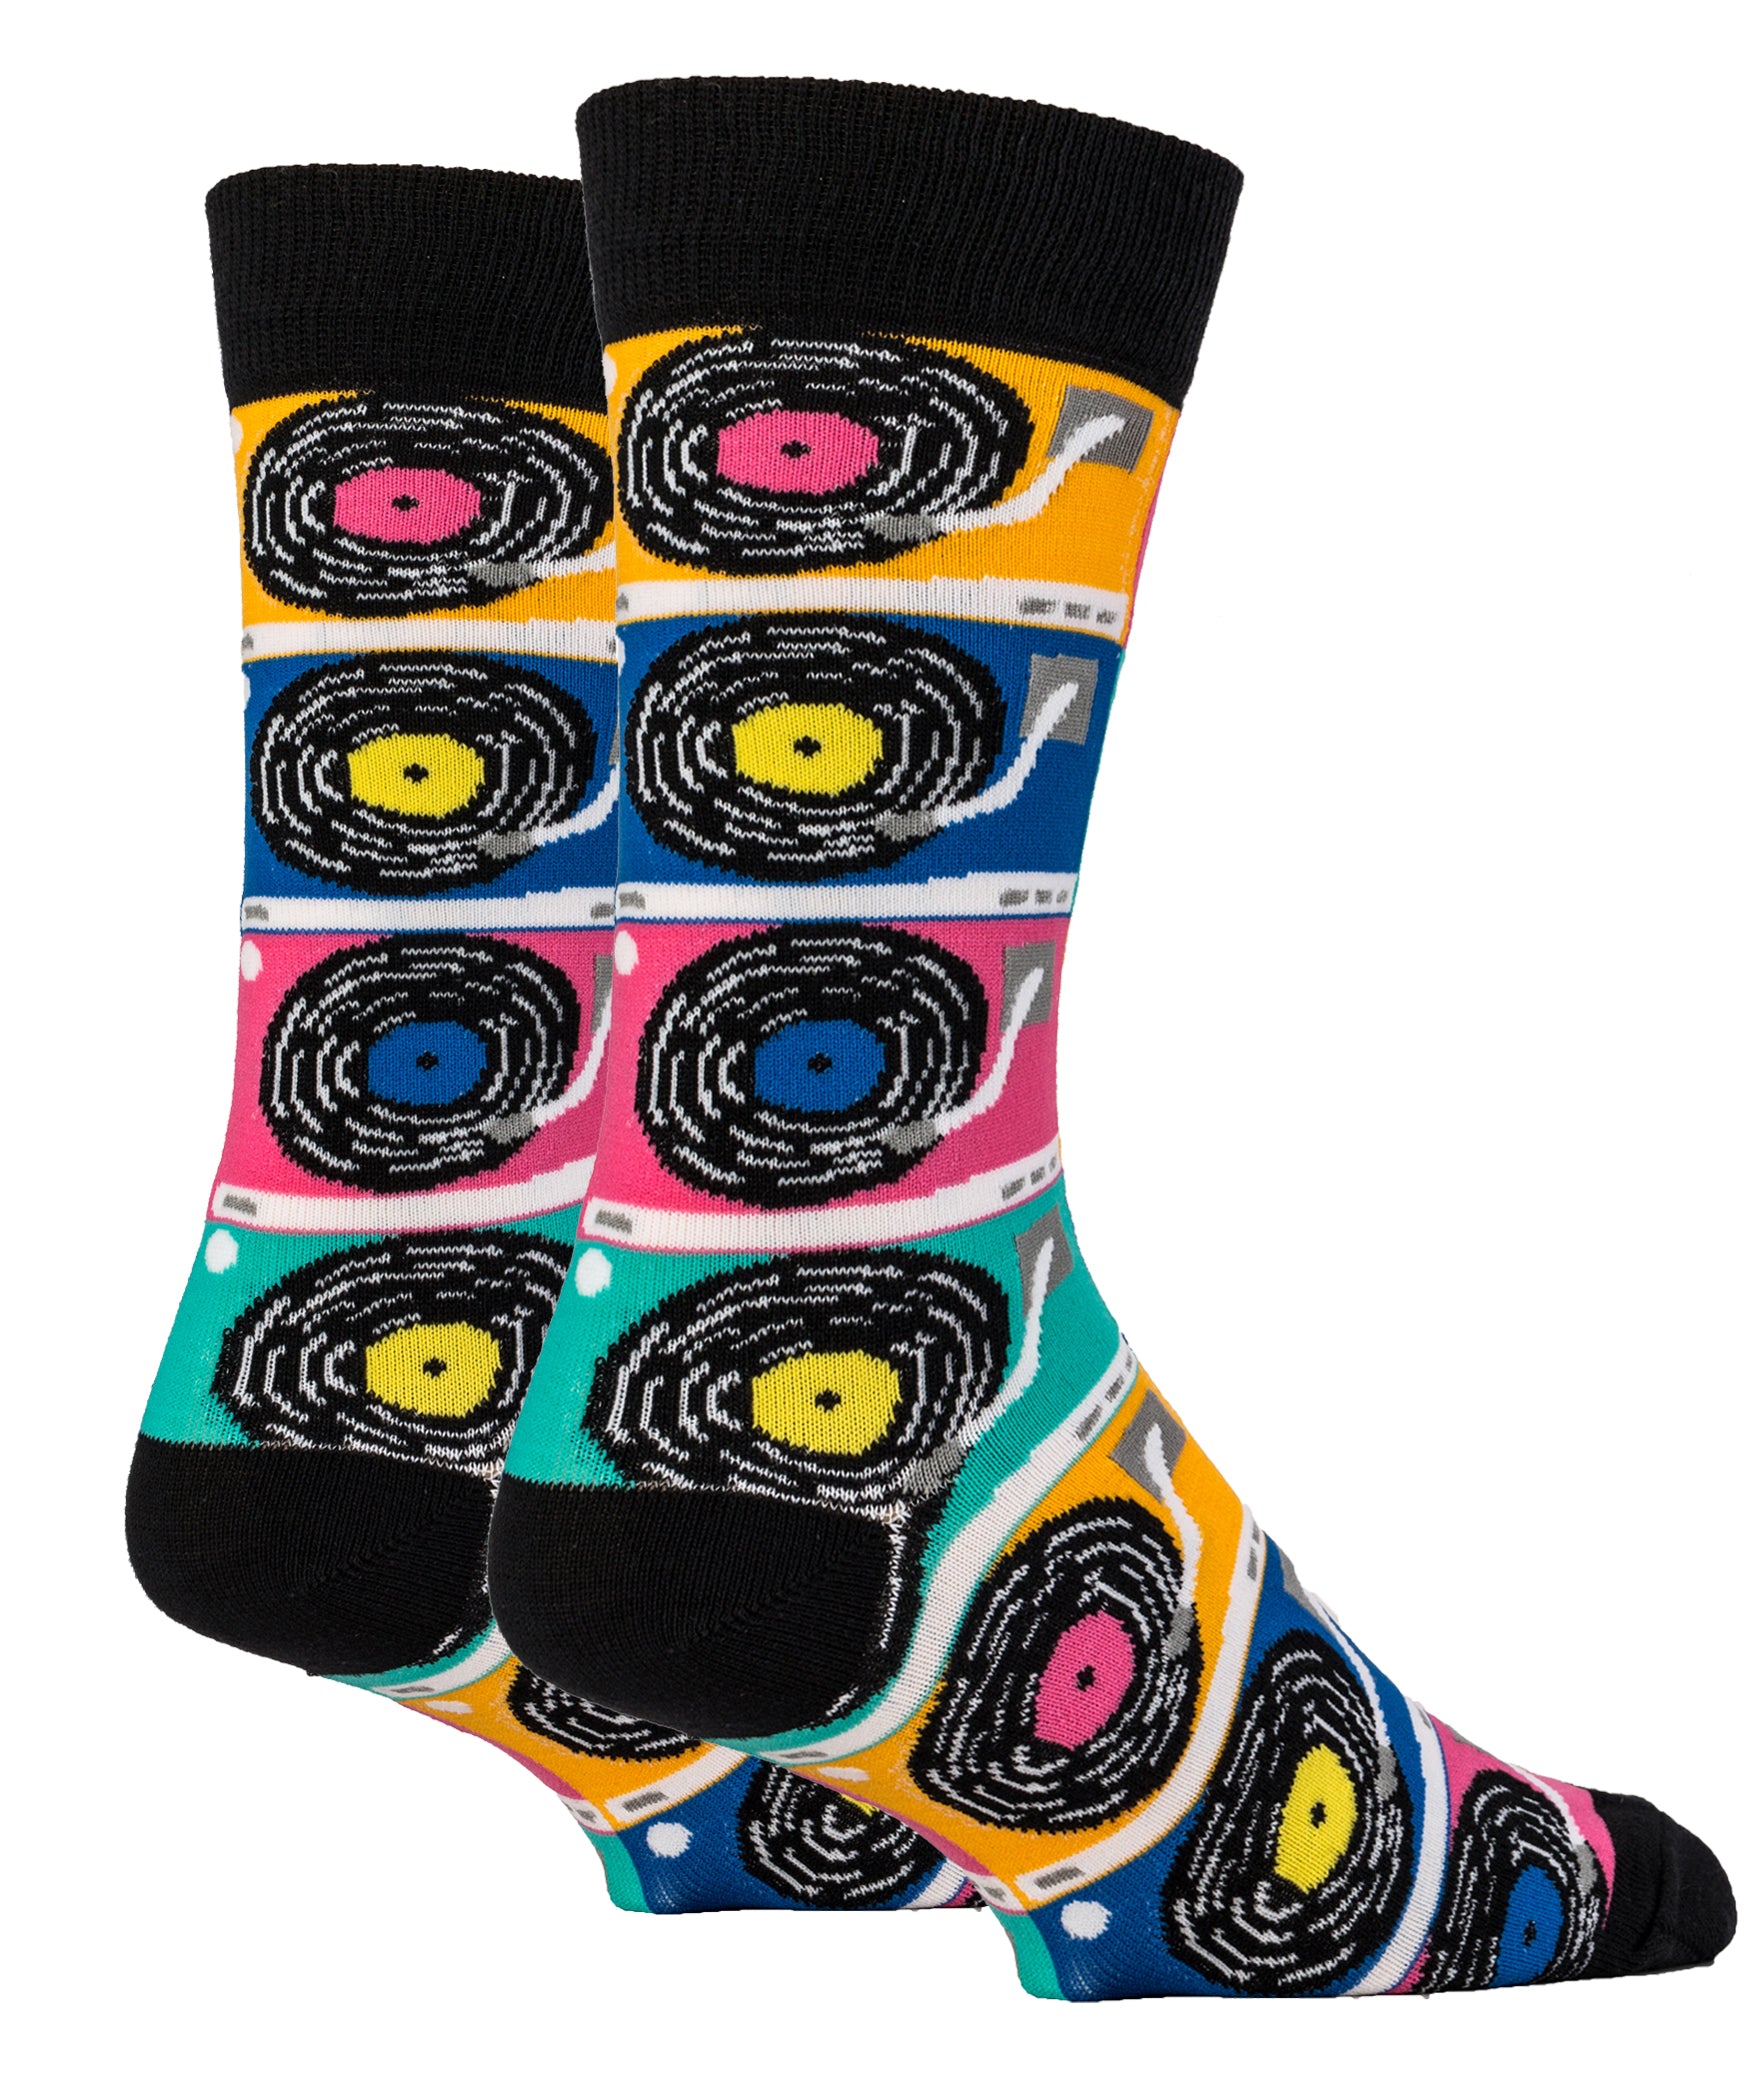 Put That Record On - Oooh Yeah Socks